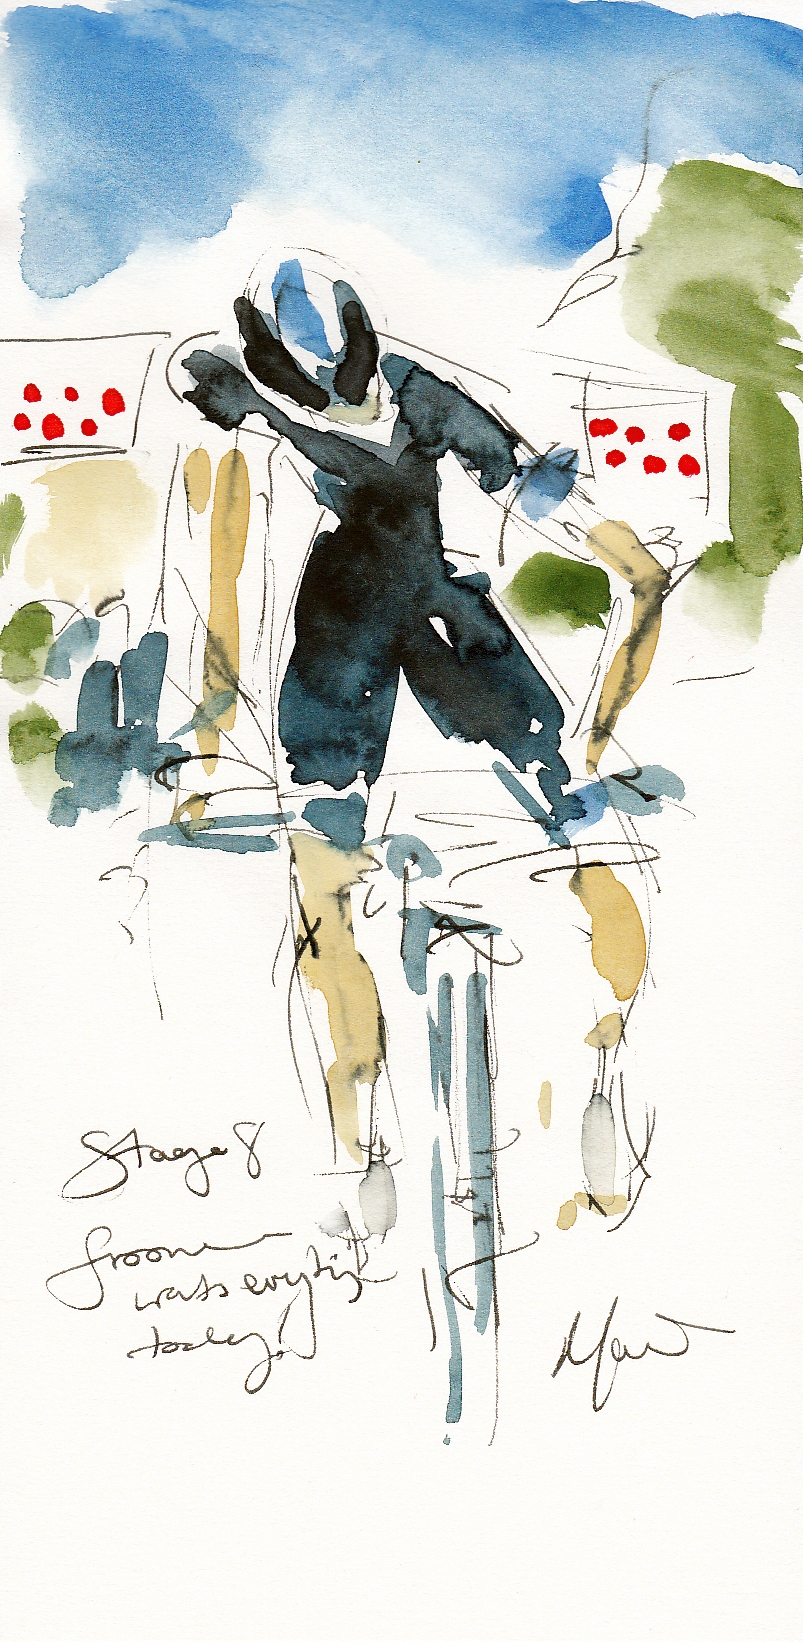 Tour de France, cycling, art, Froome wants everything today! by Maxine Dodd